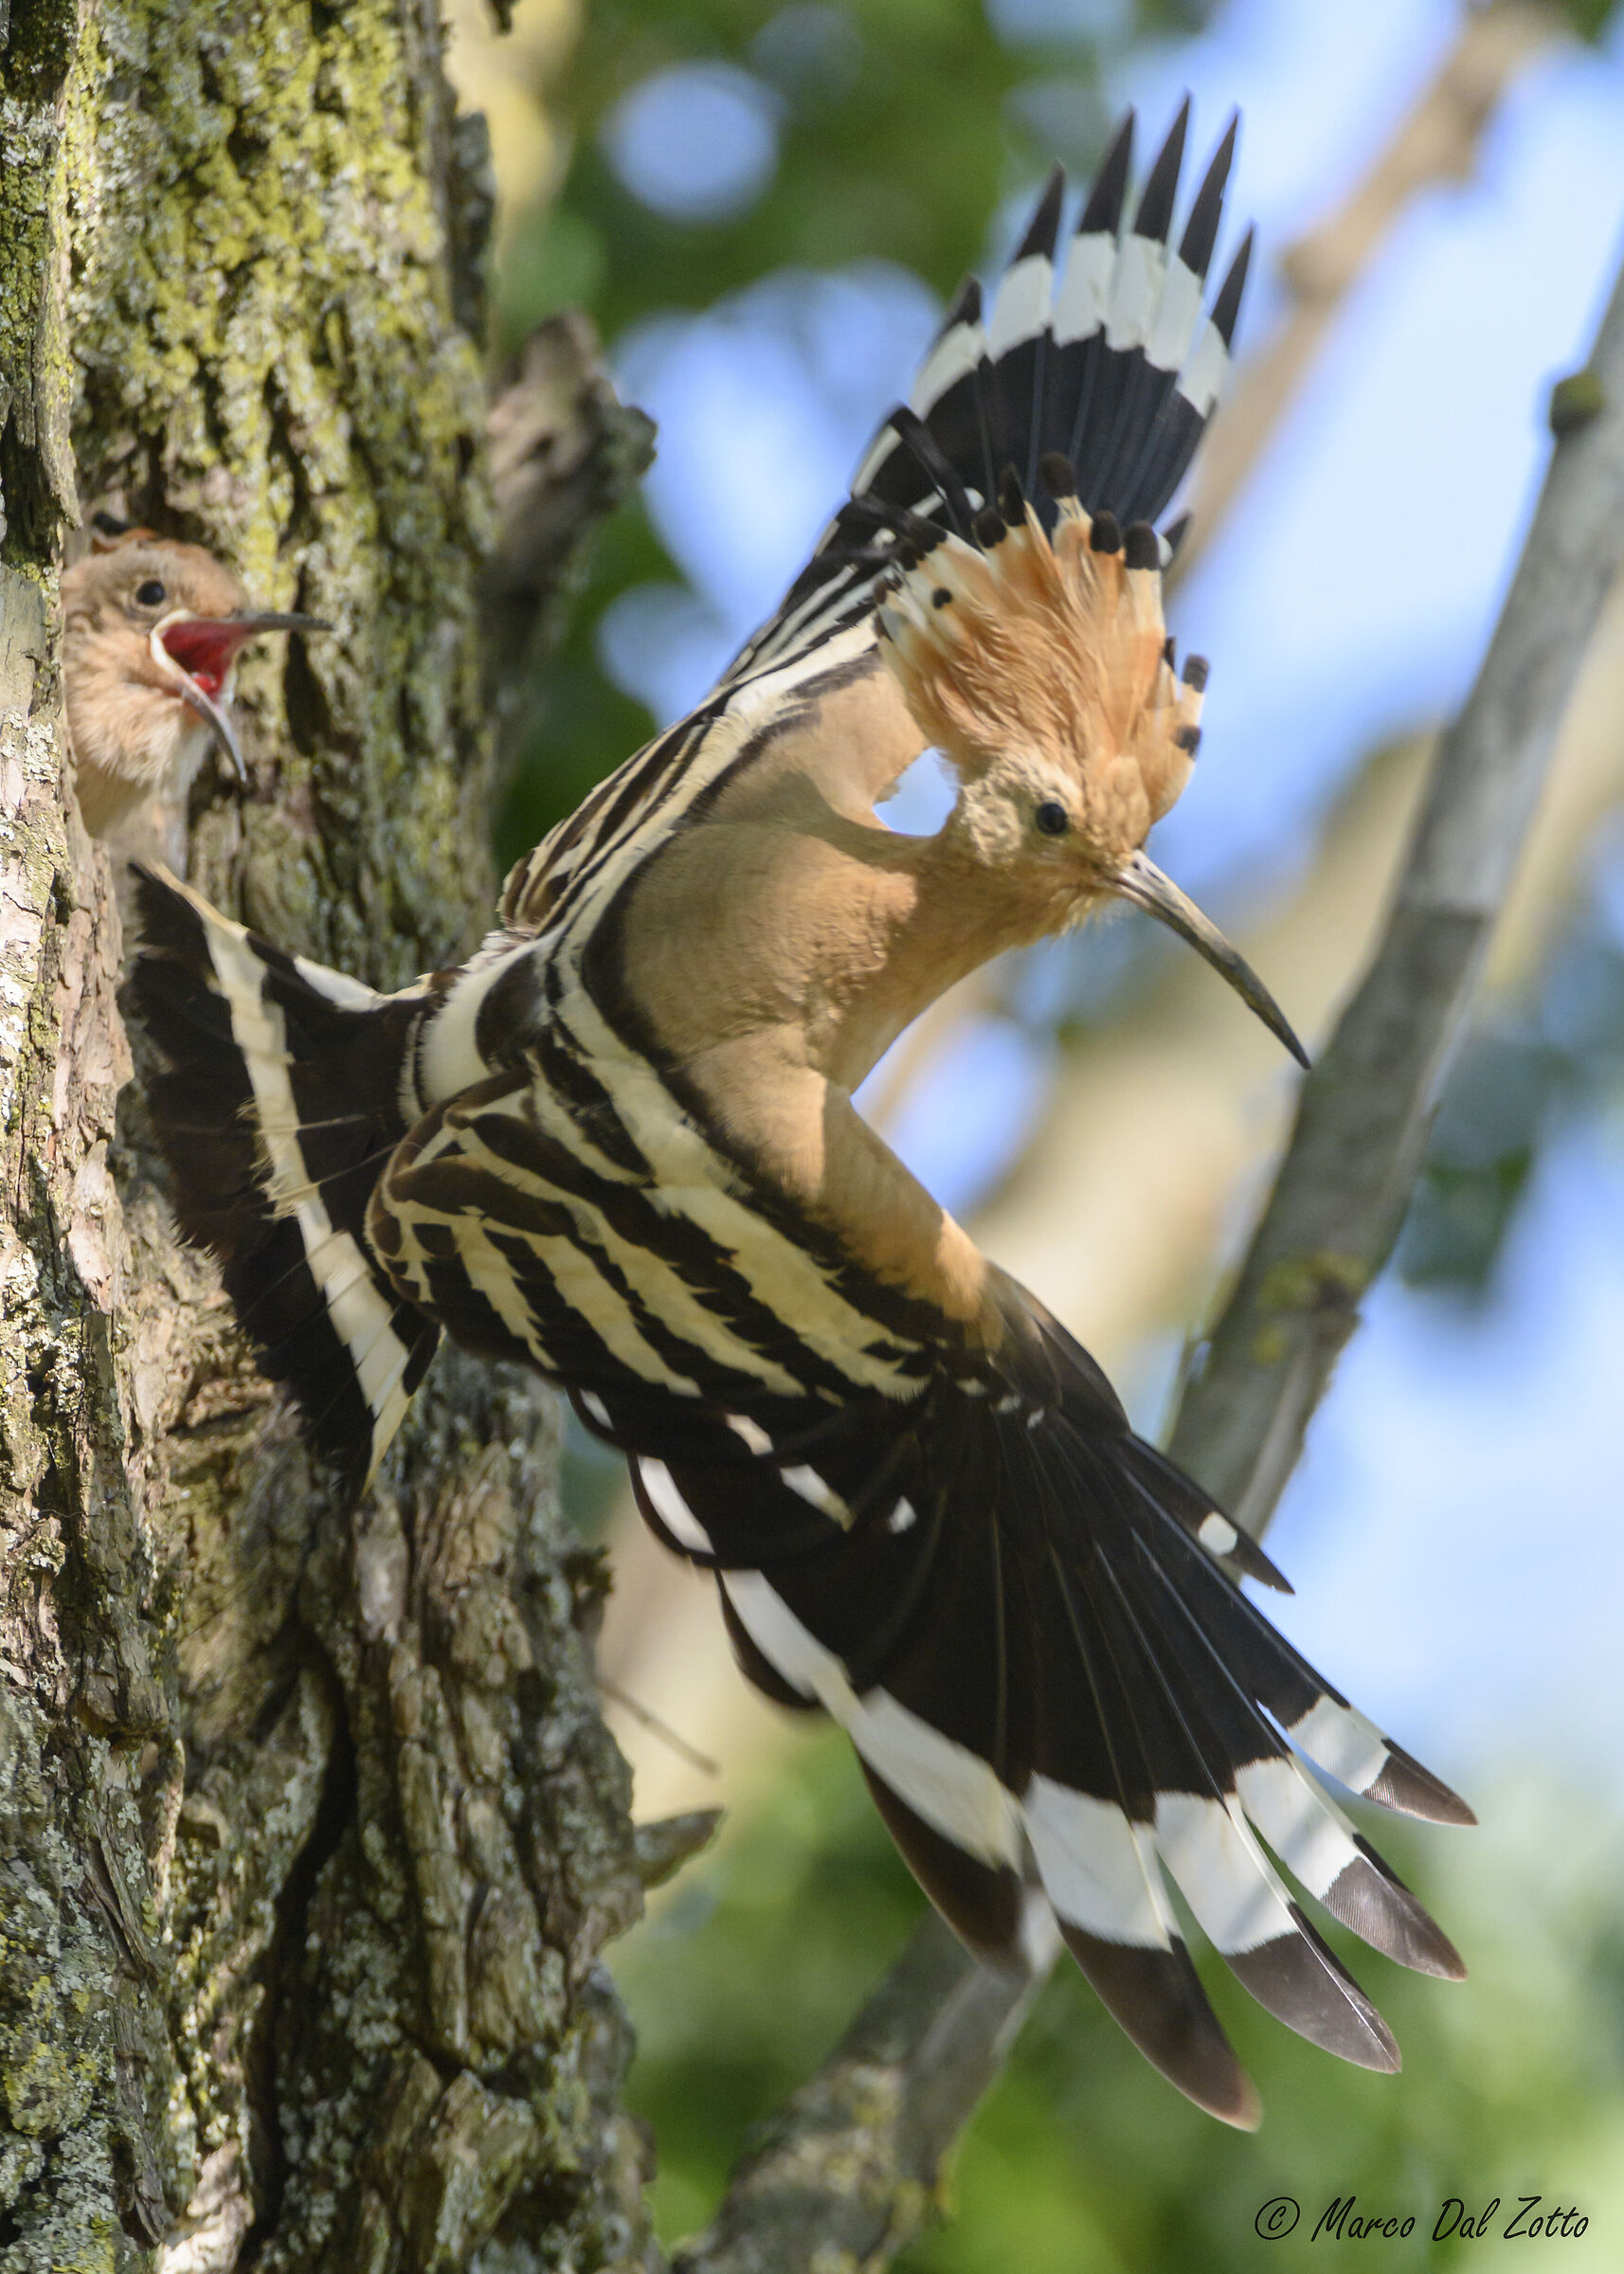 Young hoopoes never satiated ...